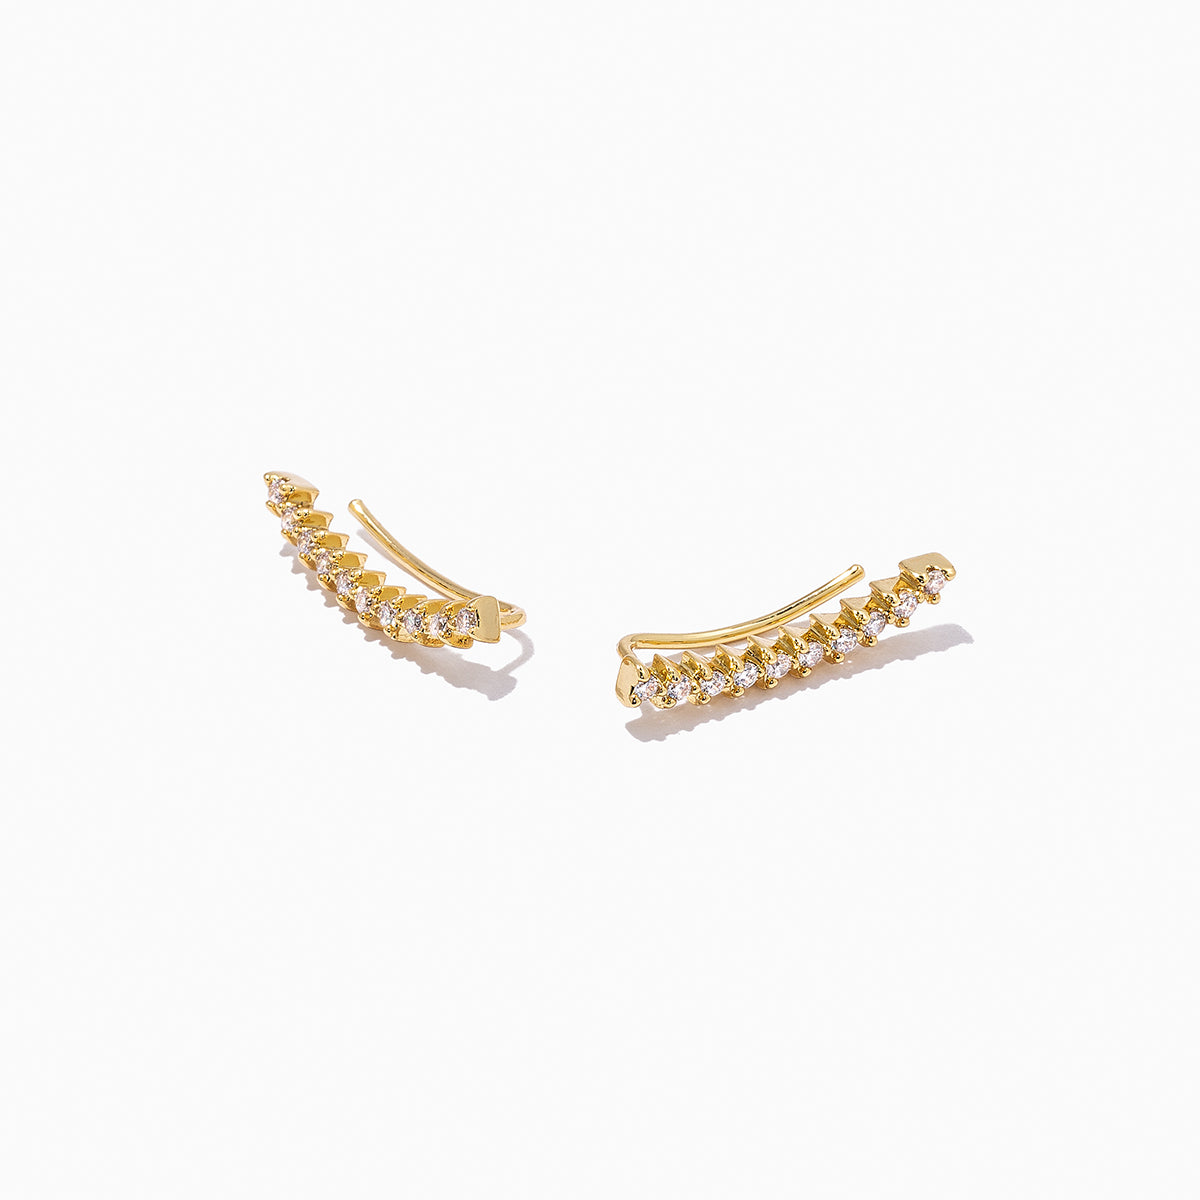 Riverside Ear Climber | Gold | Product Detail Image | Uncommon James